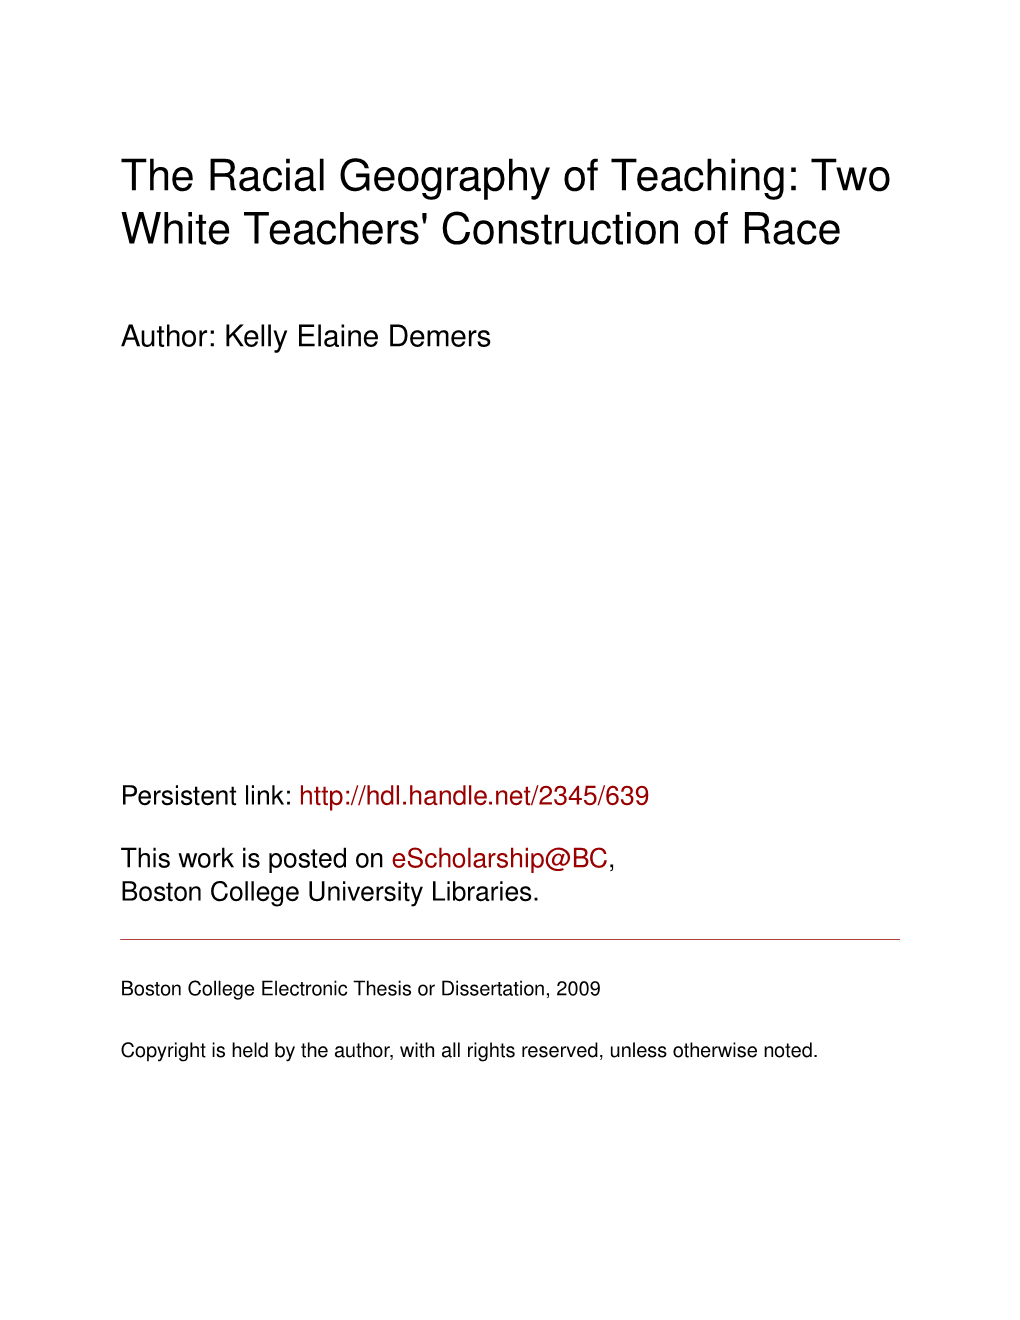 The Racial Geography of Teaching: Two White Teachers' Construction of Race